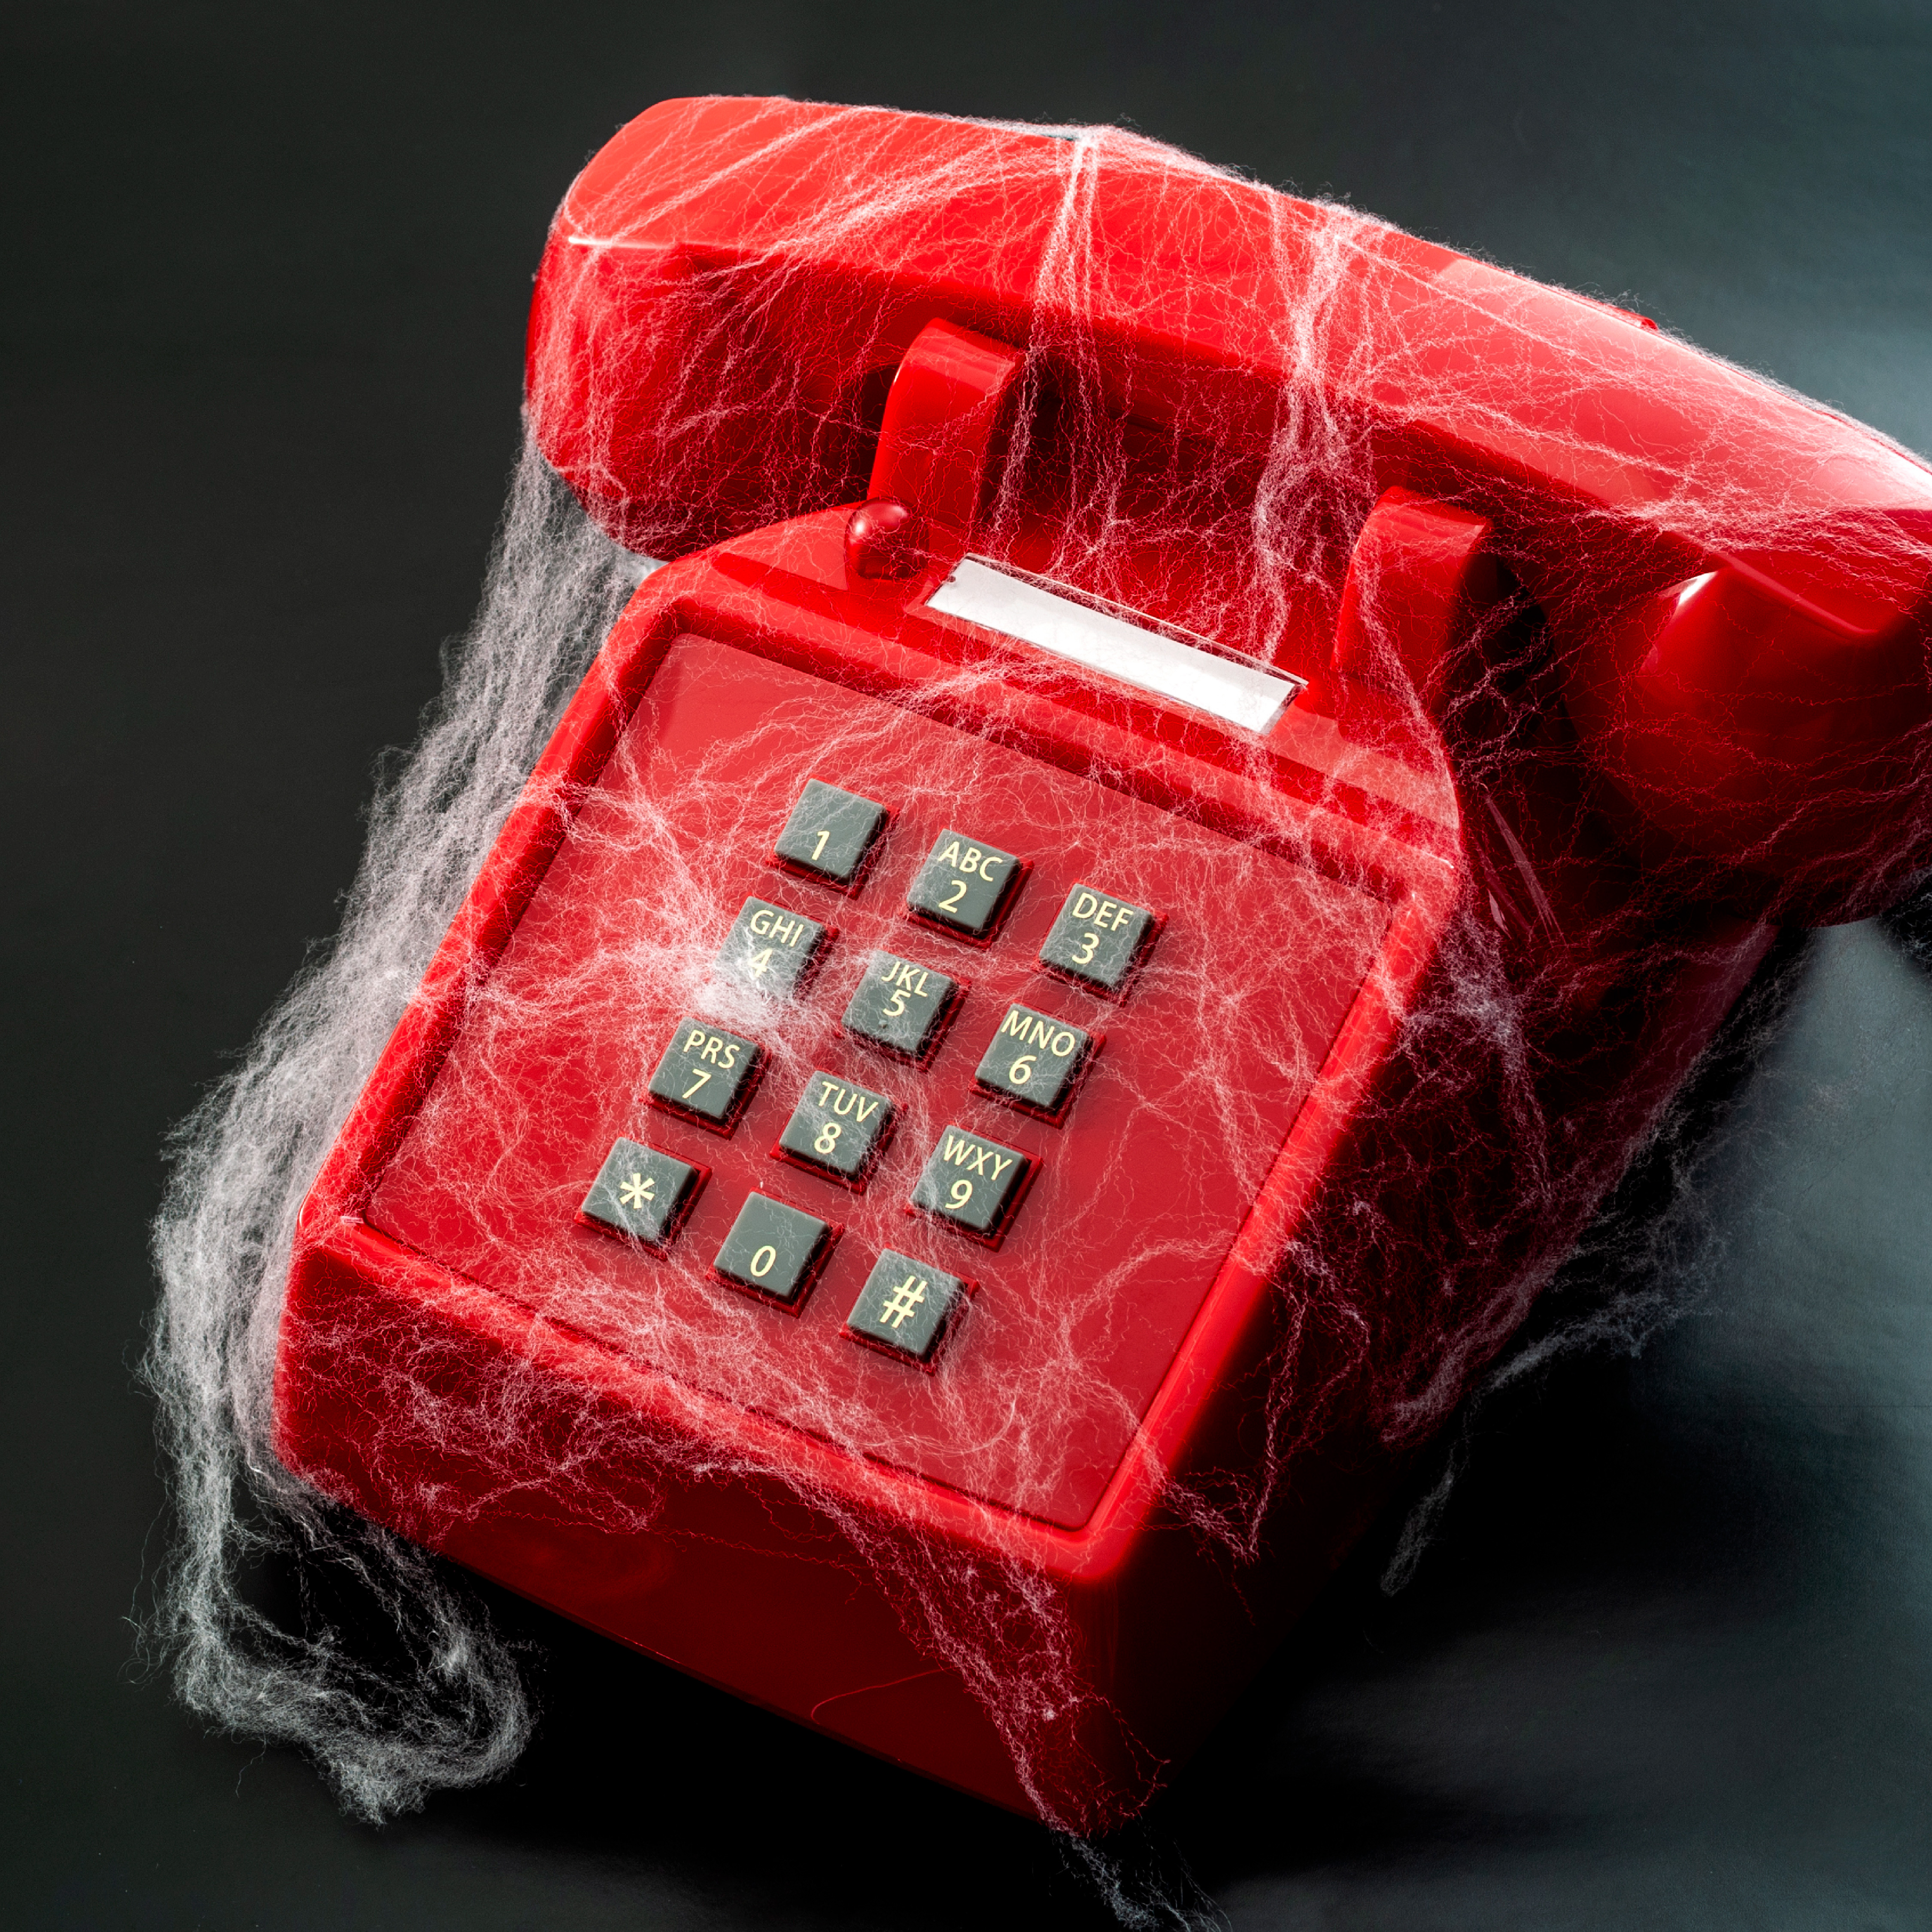 Is Your Office Phone System Keeping Up?